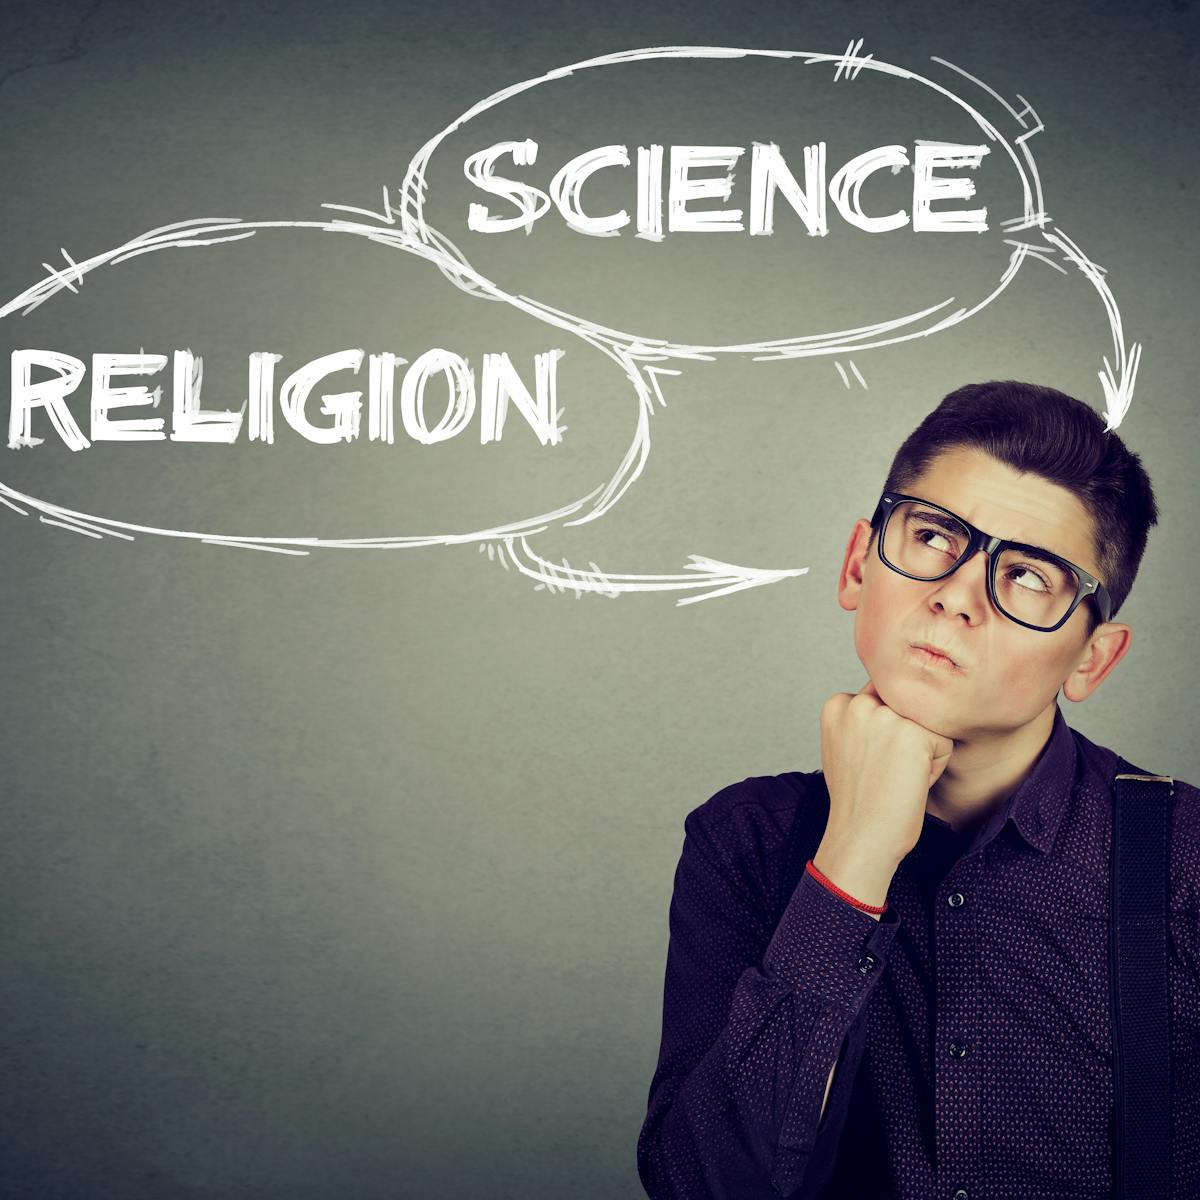 Many scientists are atheists, but that doesn't mean they are anti-religious